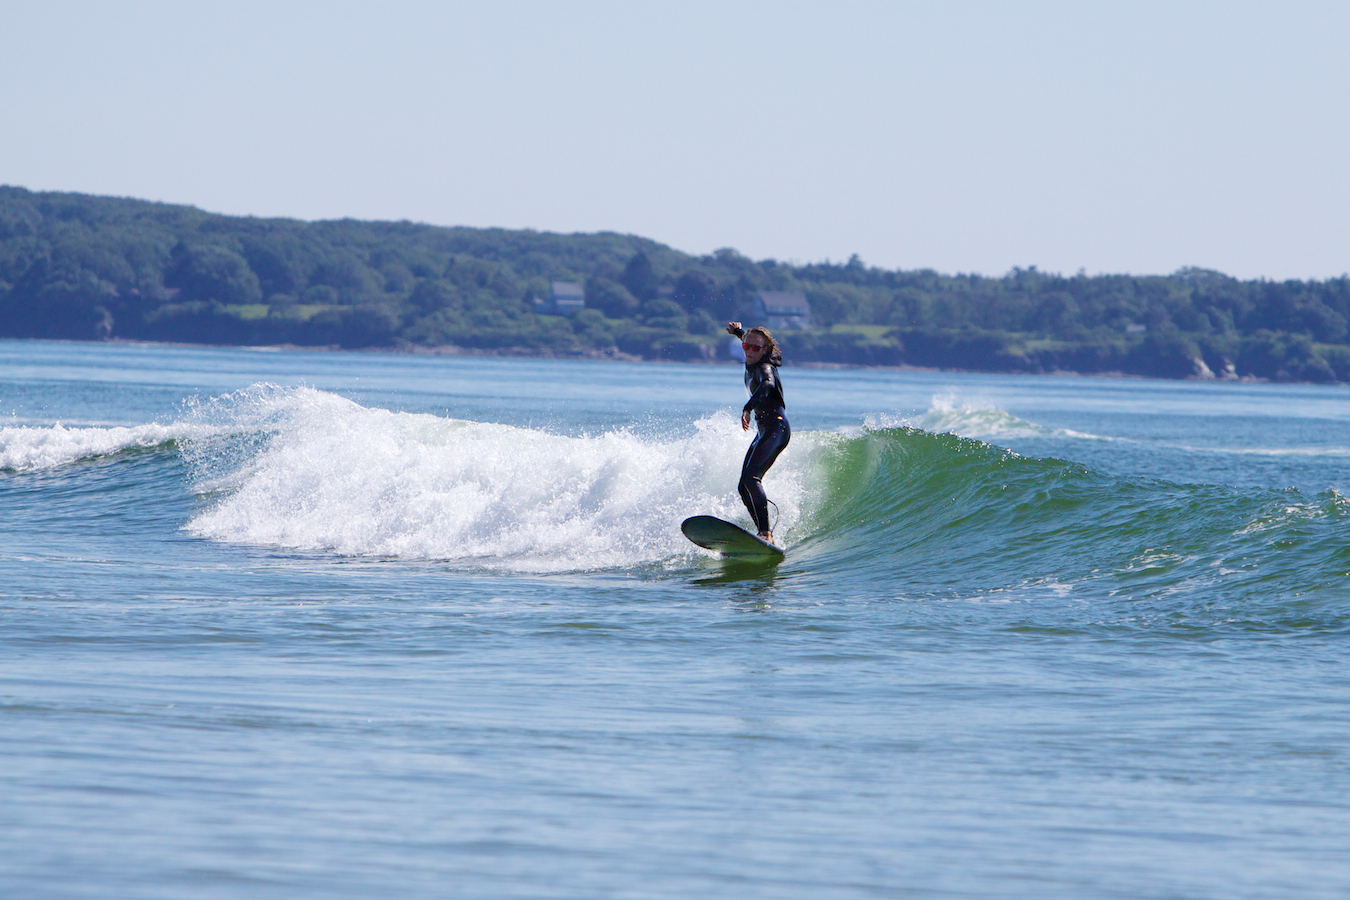 Located at Scarborough Beach, Surf Camp has access to the prime surf real estate in Southern Maine